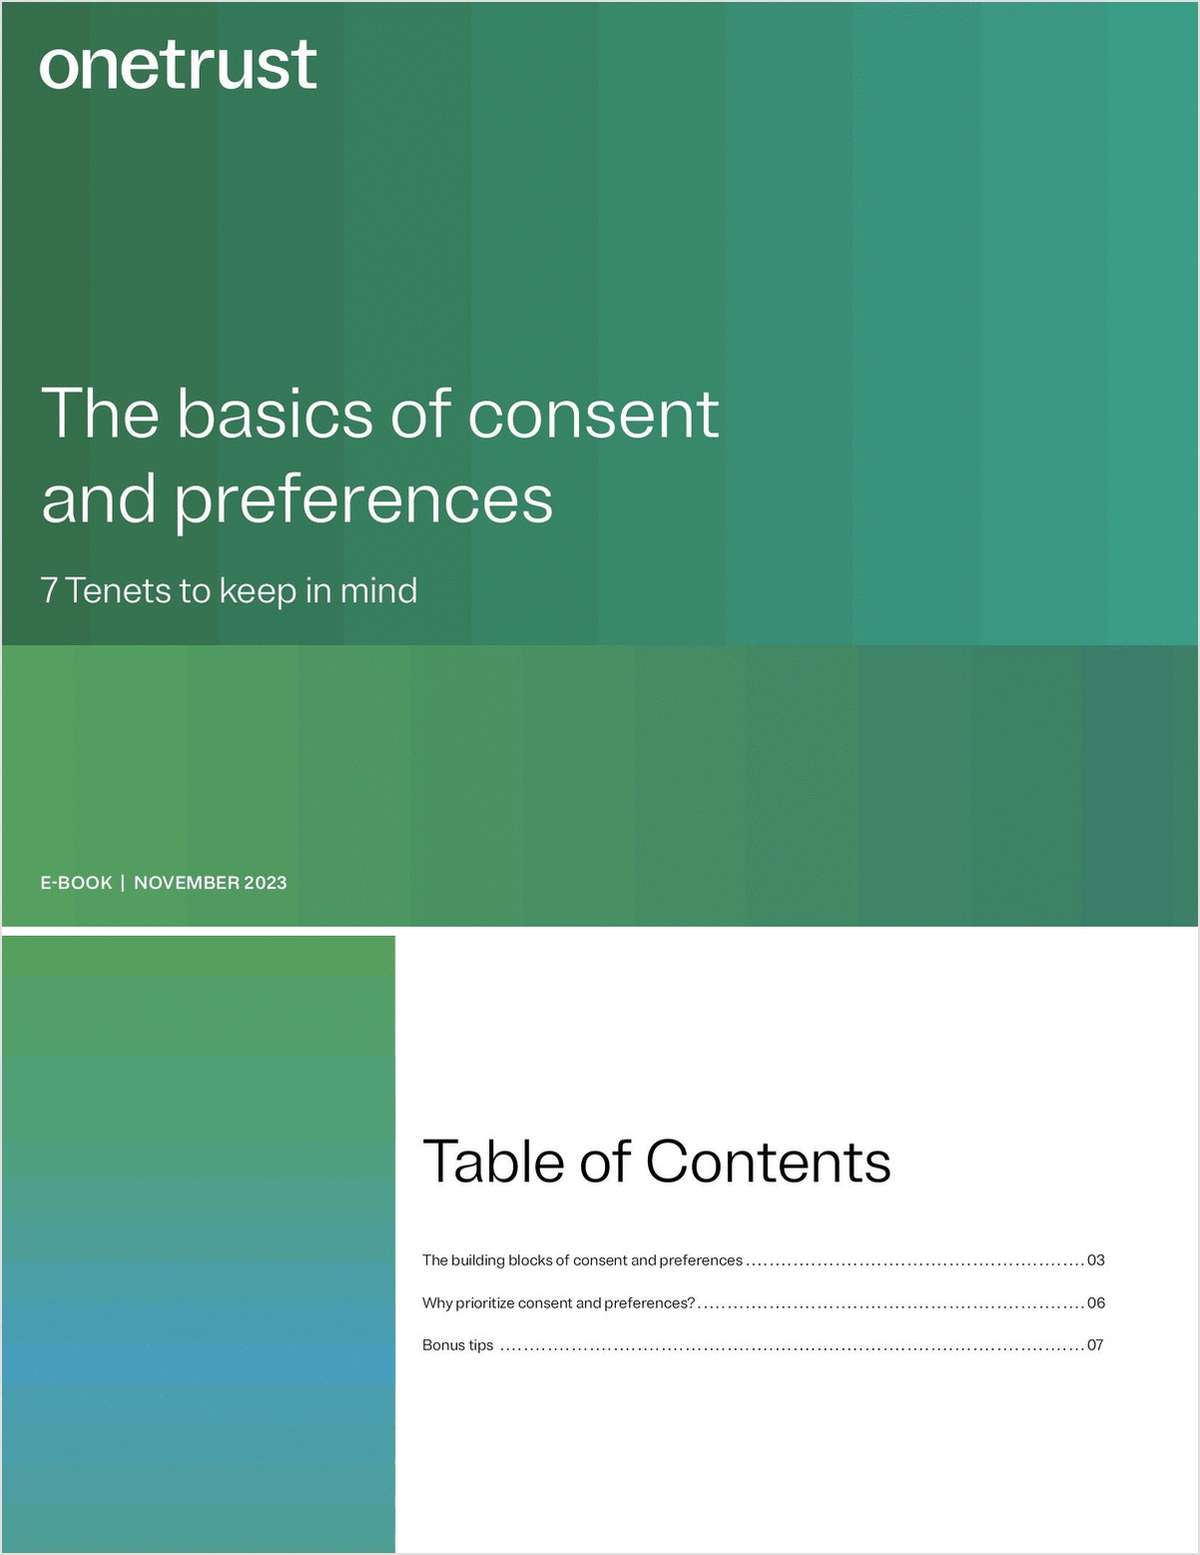 The Basics of Consent and Preferences: 7 Tenets to Keep in Mind